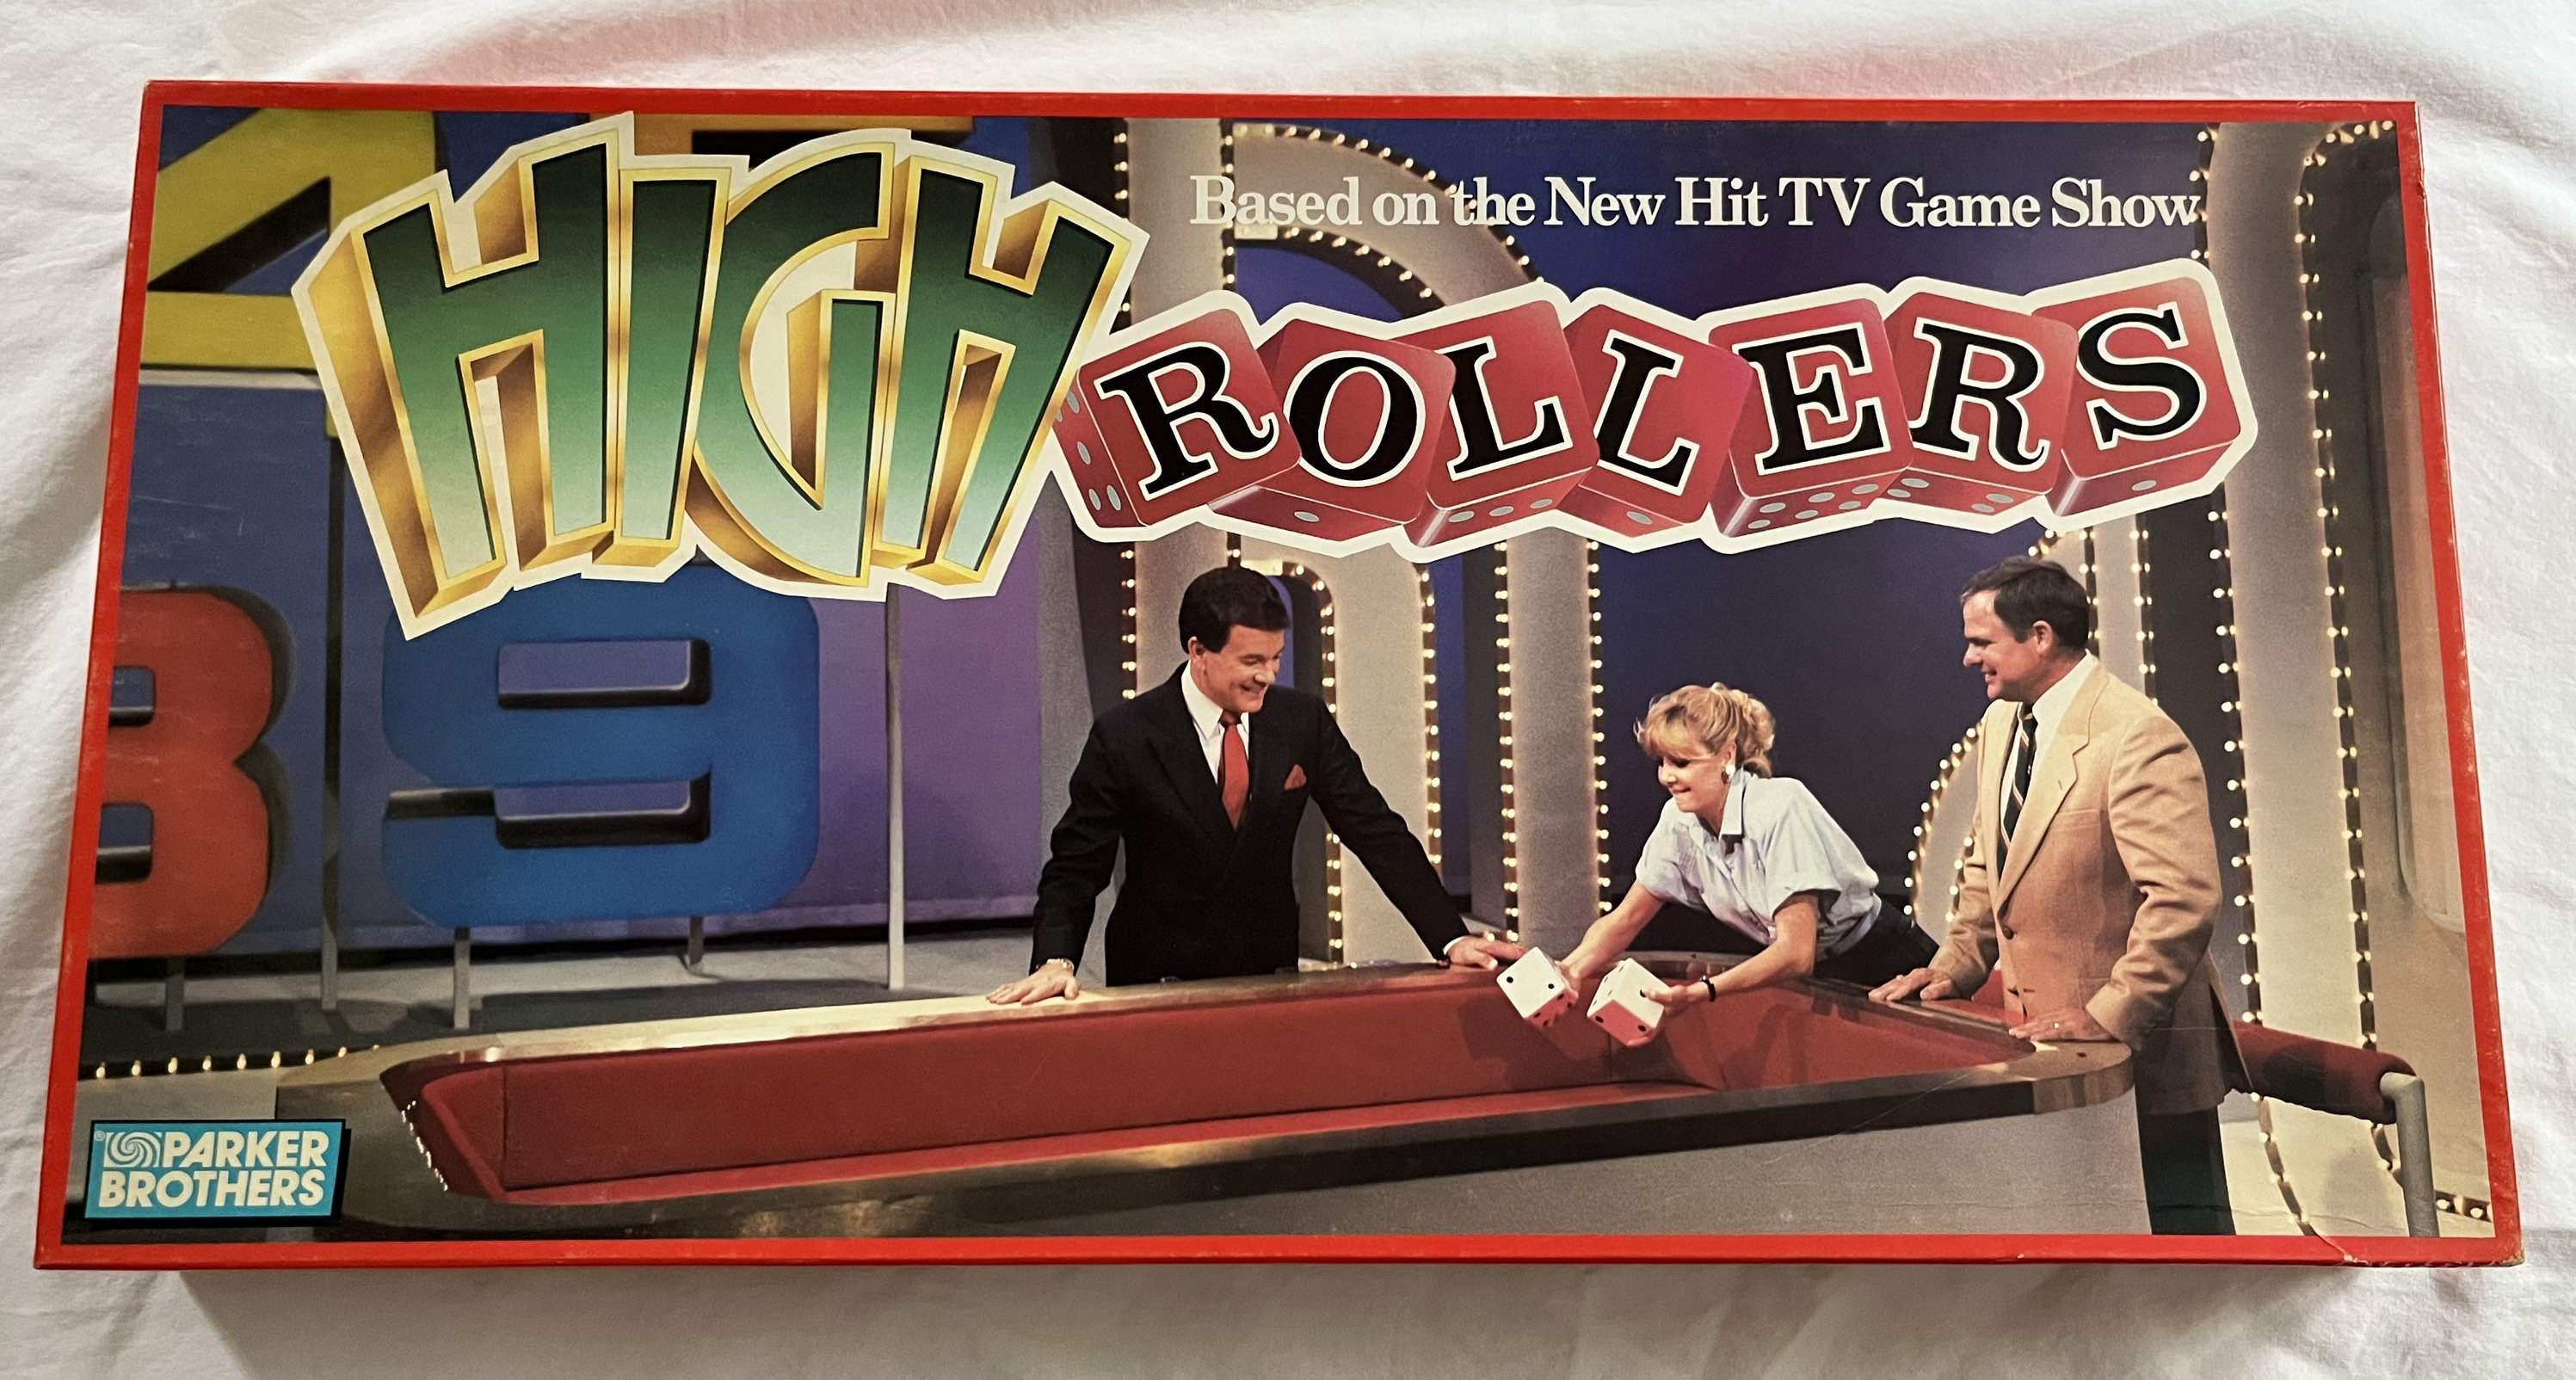 Vintage/ 1988/ High Rollers/ Based on the New Hit TV Game - Etsy